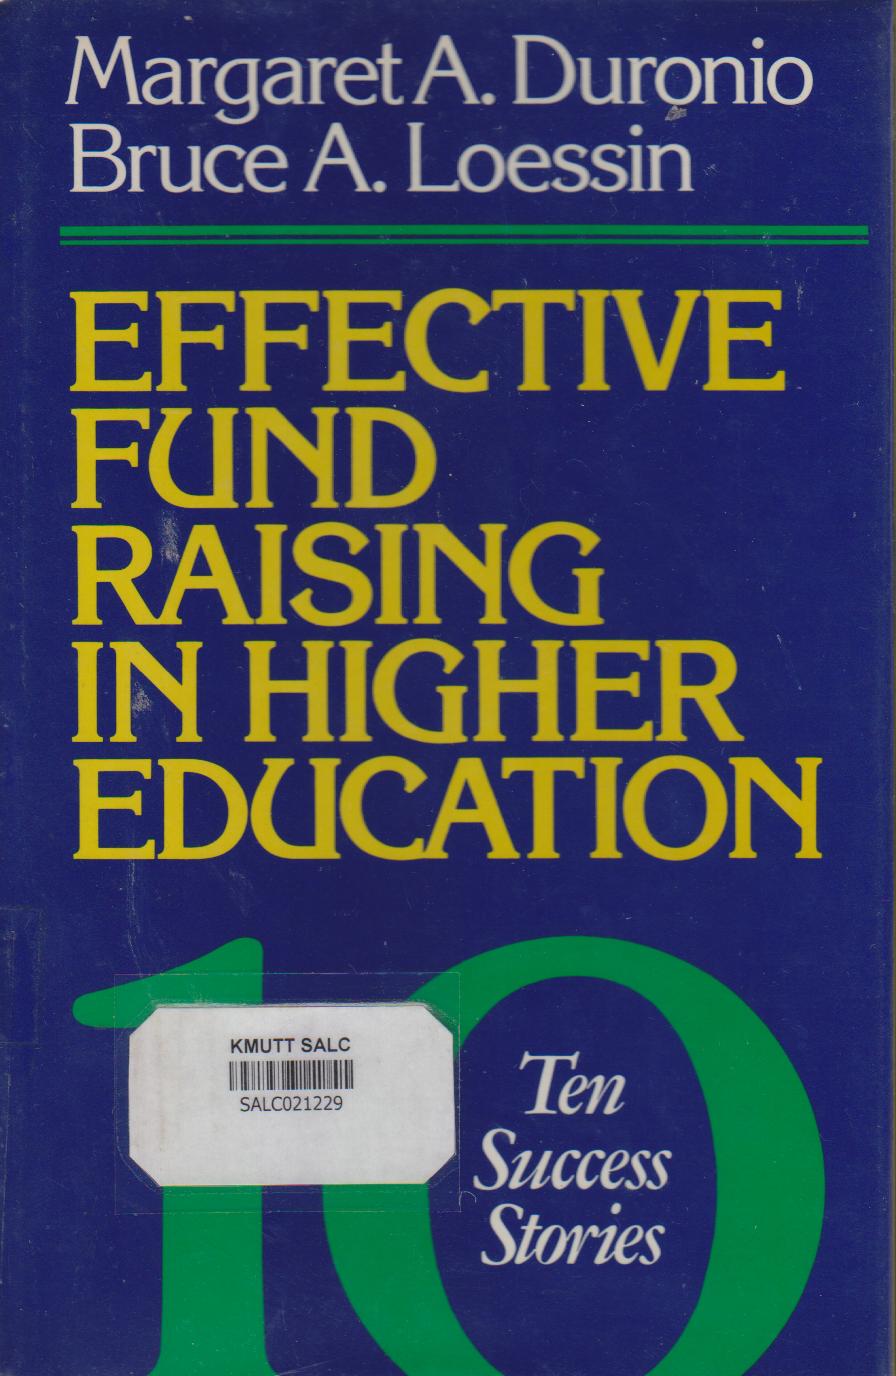 EFFECTIVE FUND RAISING IN HIGHER EDUCATION